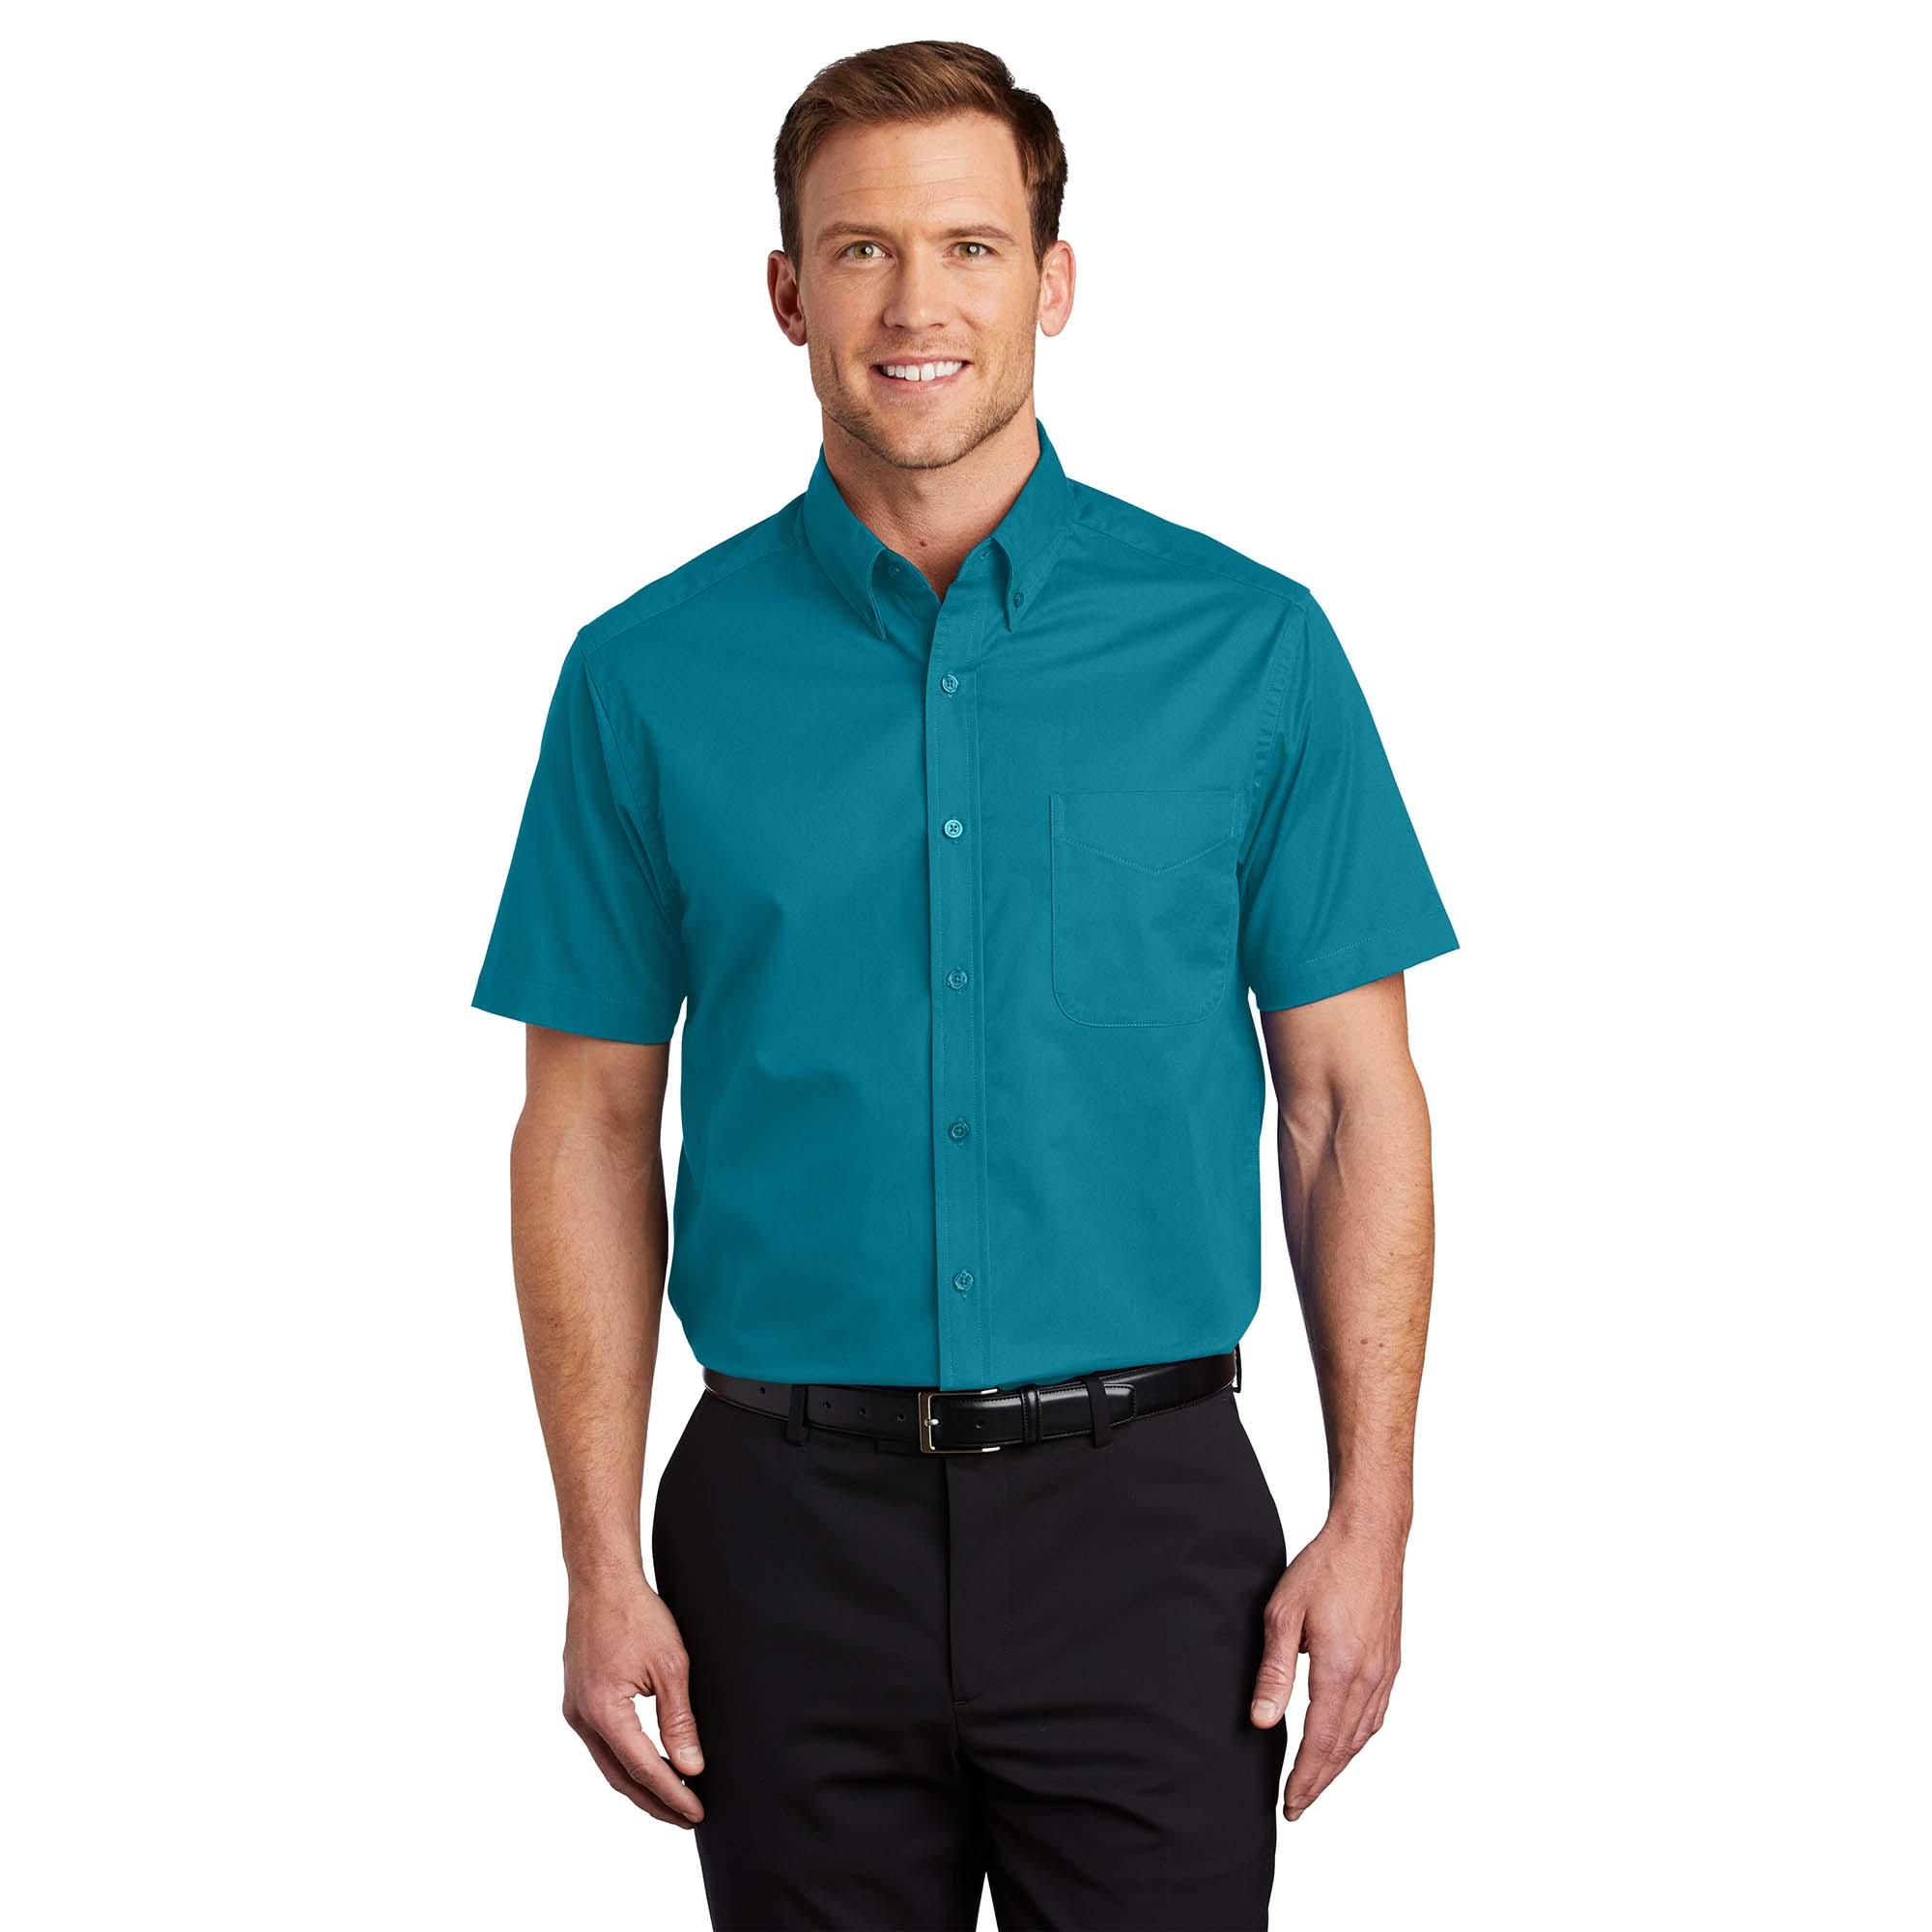 Port Authority S508 Short Sleeve Easy Care Shirt - Teal Green | Full Source